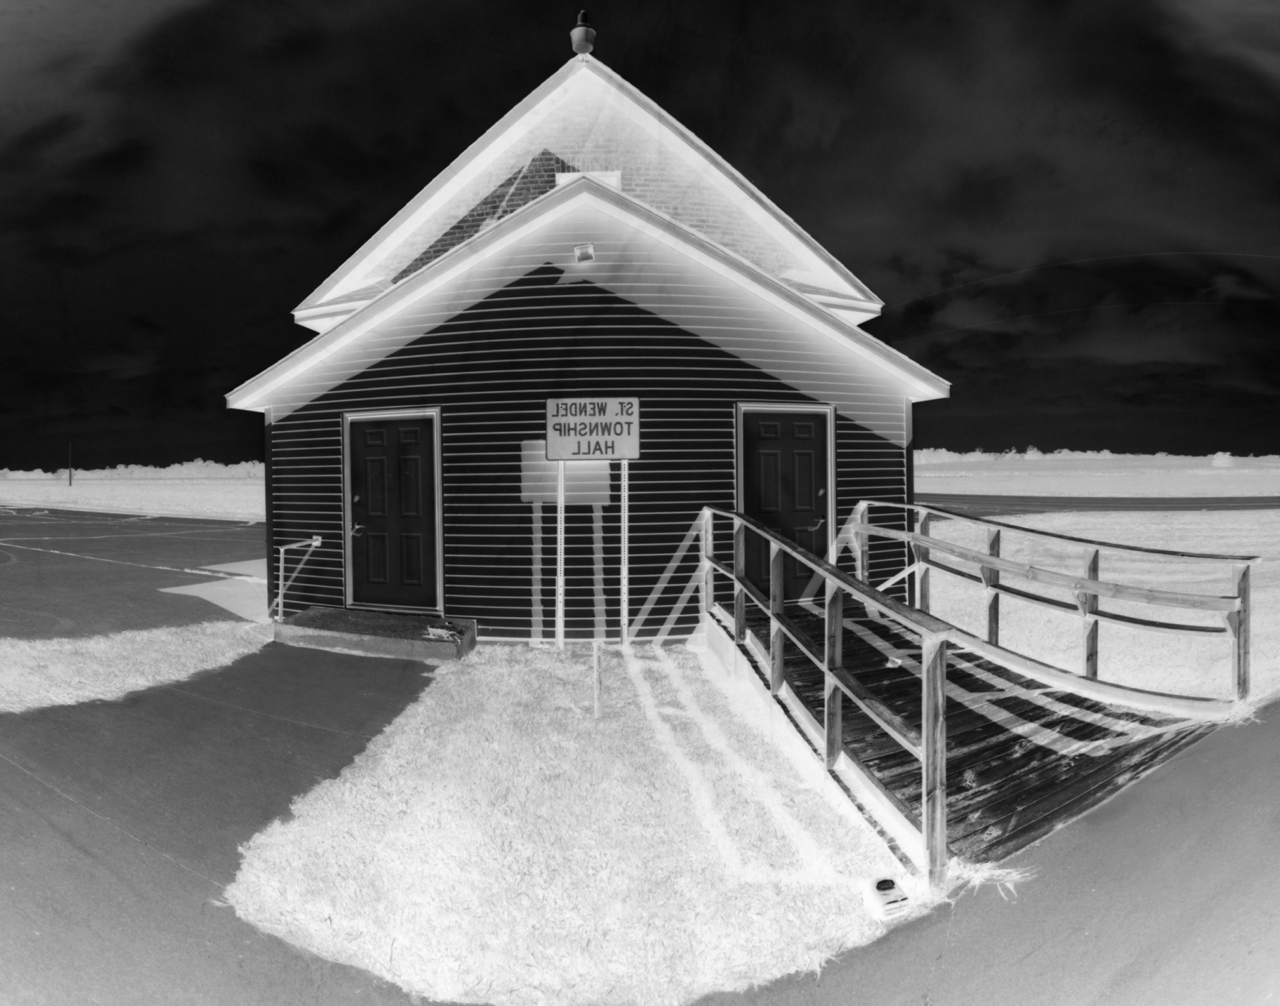 Portrait of the St. Wendel township hall in Stearns County